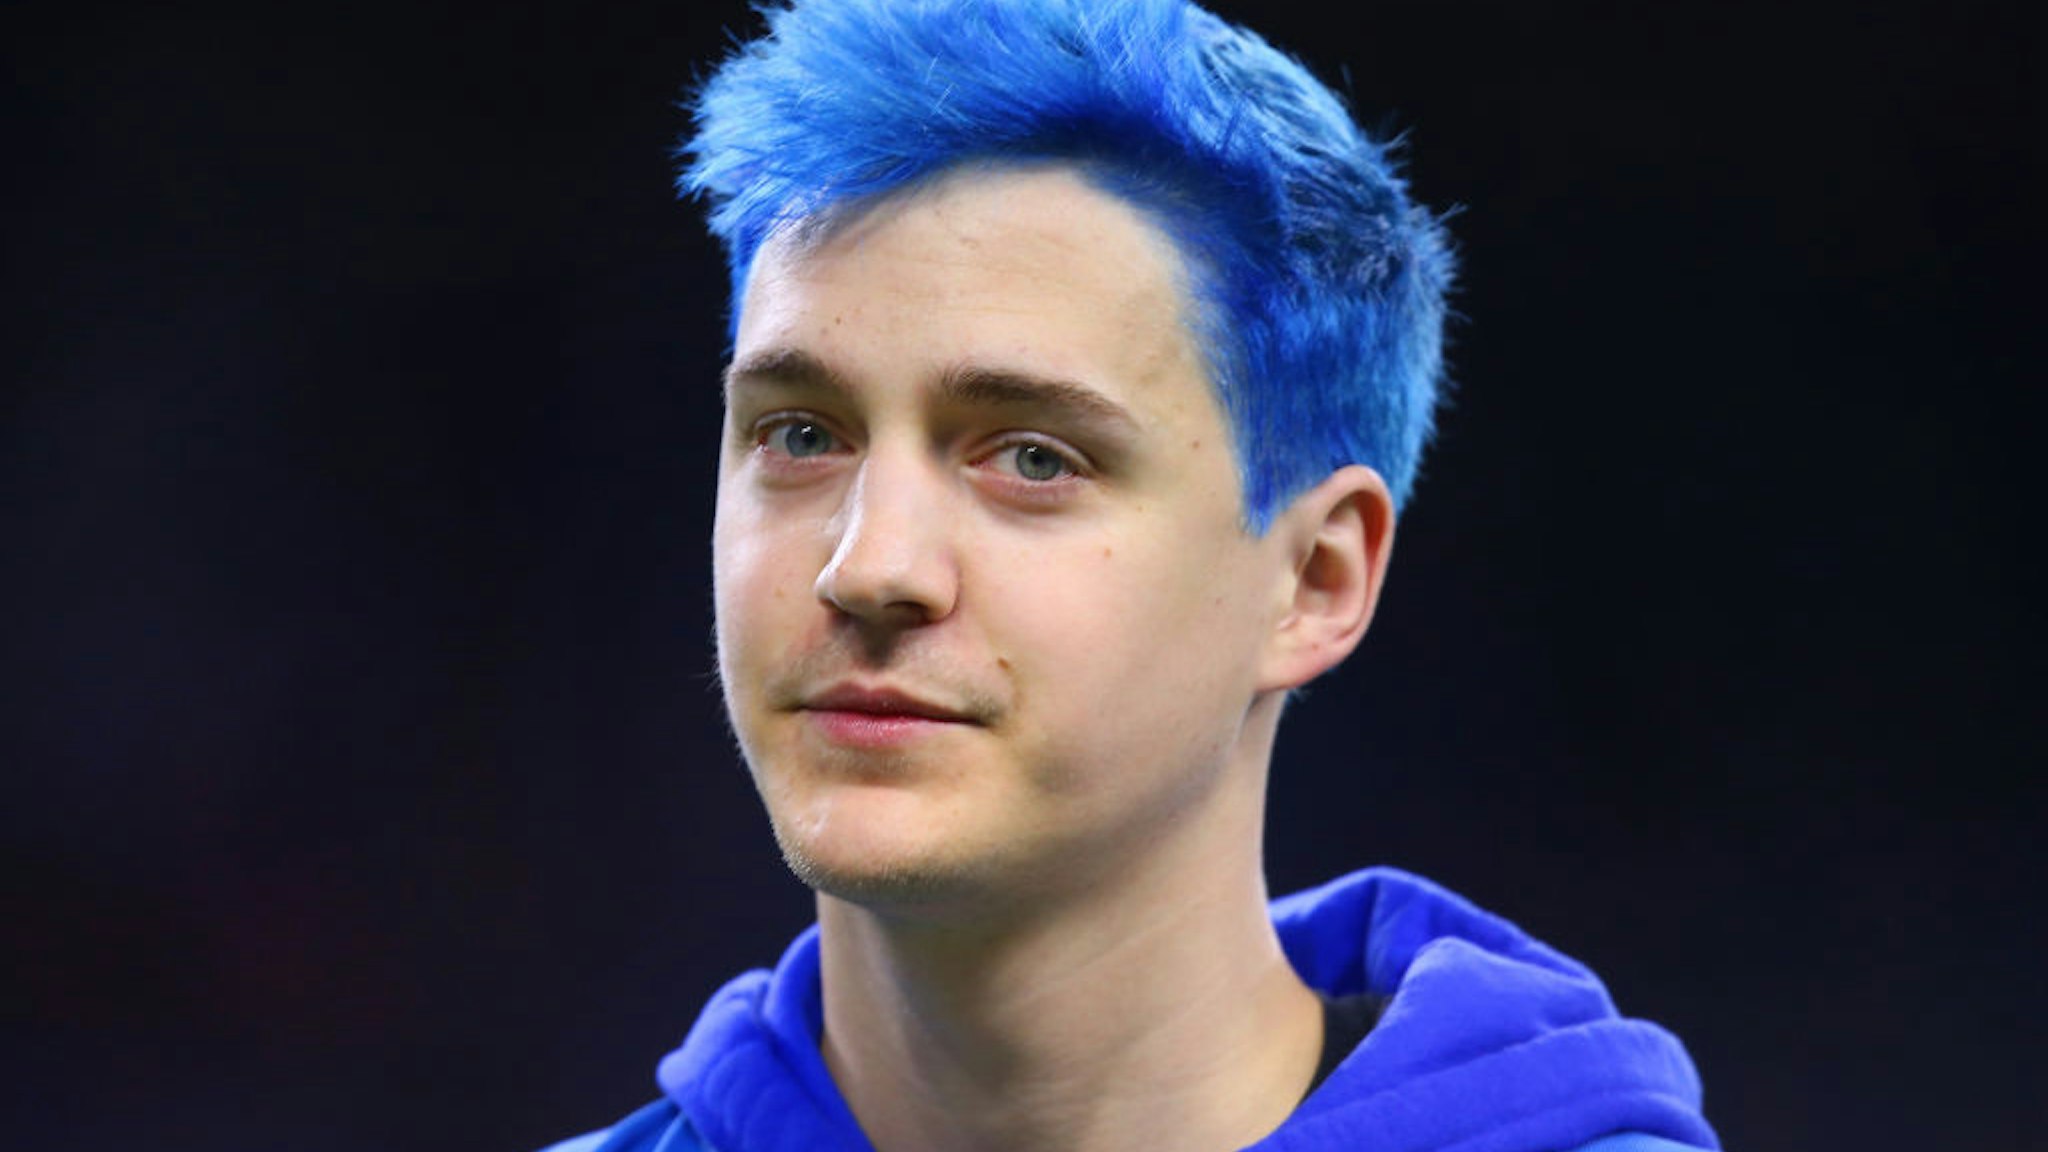 Professional gamer and internet personality Richard Tyler Blevins, known as Ninja, walks off the field after the coin toss where he was serving as an honorary captain for the Lions NFL football game against the New York Giants in Detroit, Michigan USA, on Sunday, October 27, 2019. (Photo by Amy Lemus/NurPhoto via Getty Images)